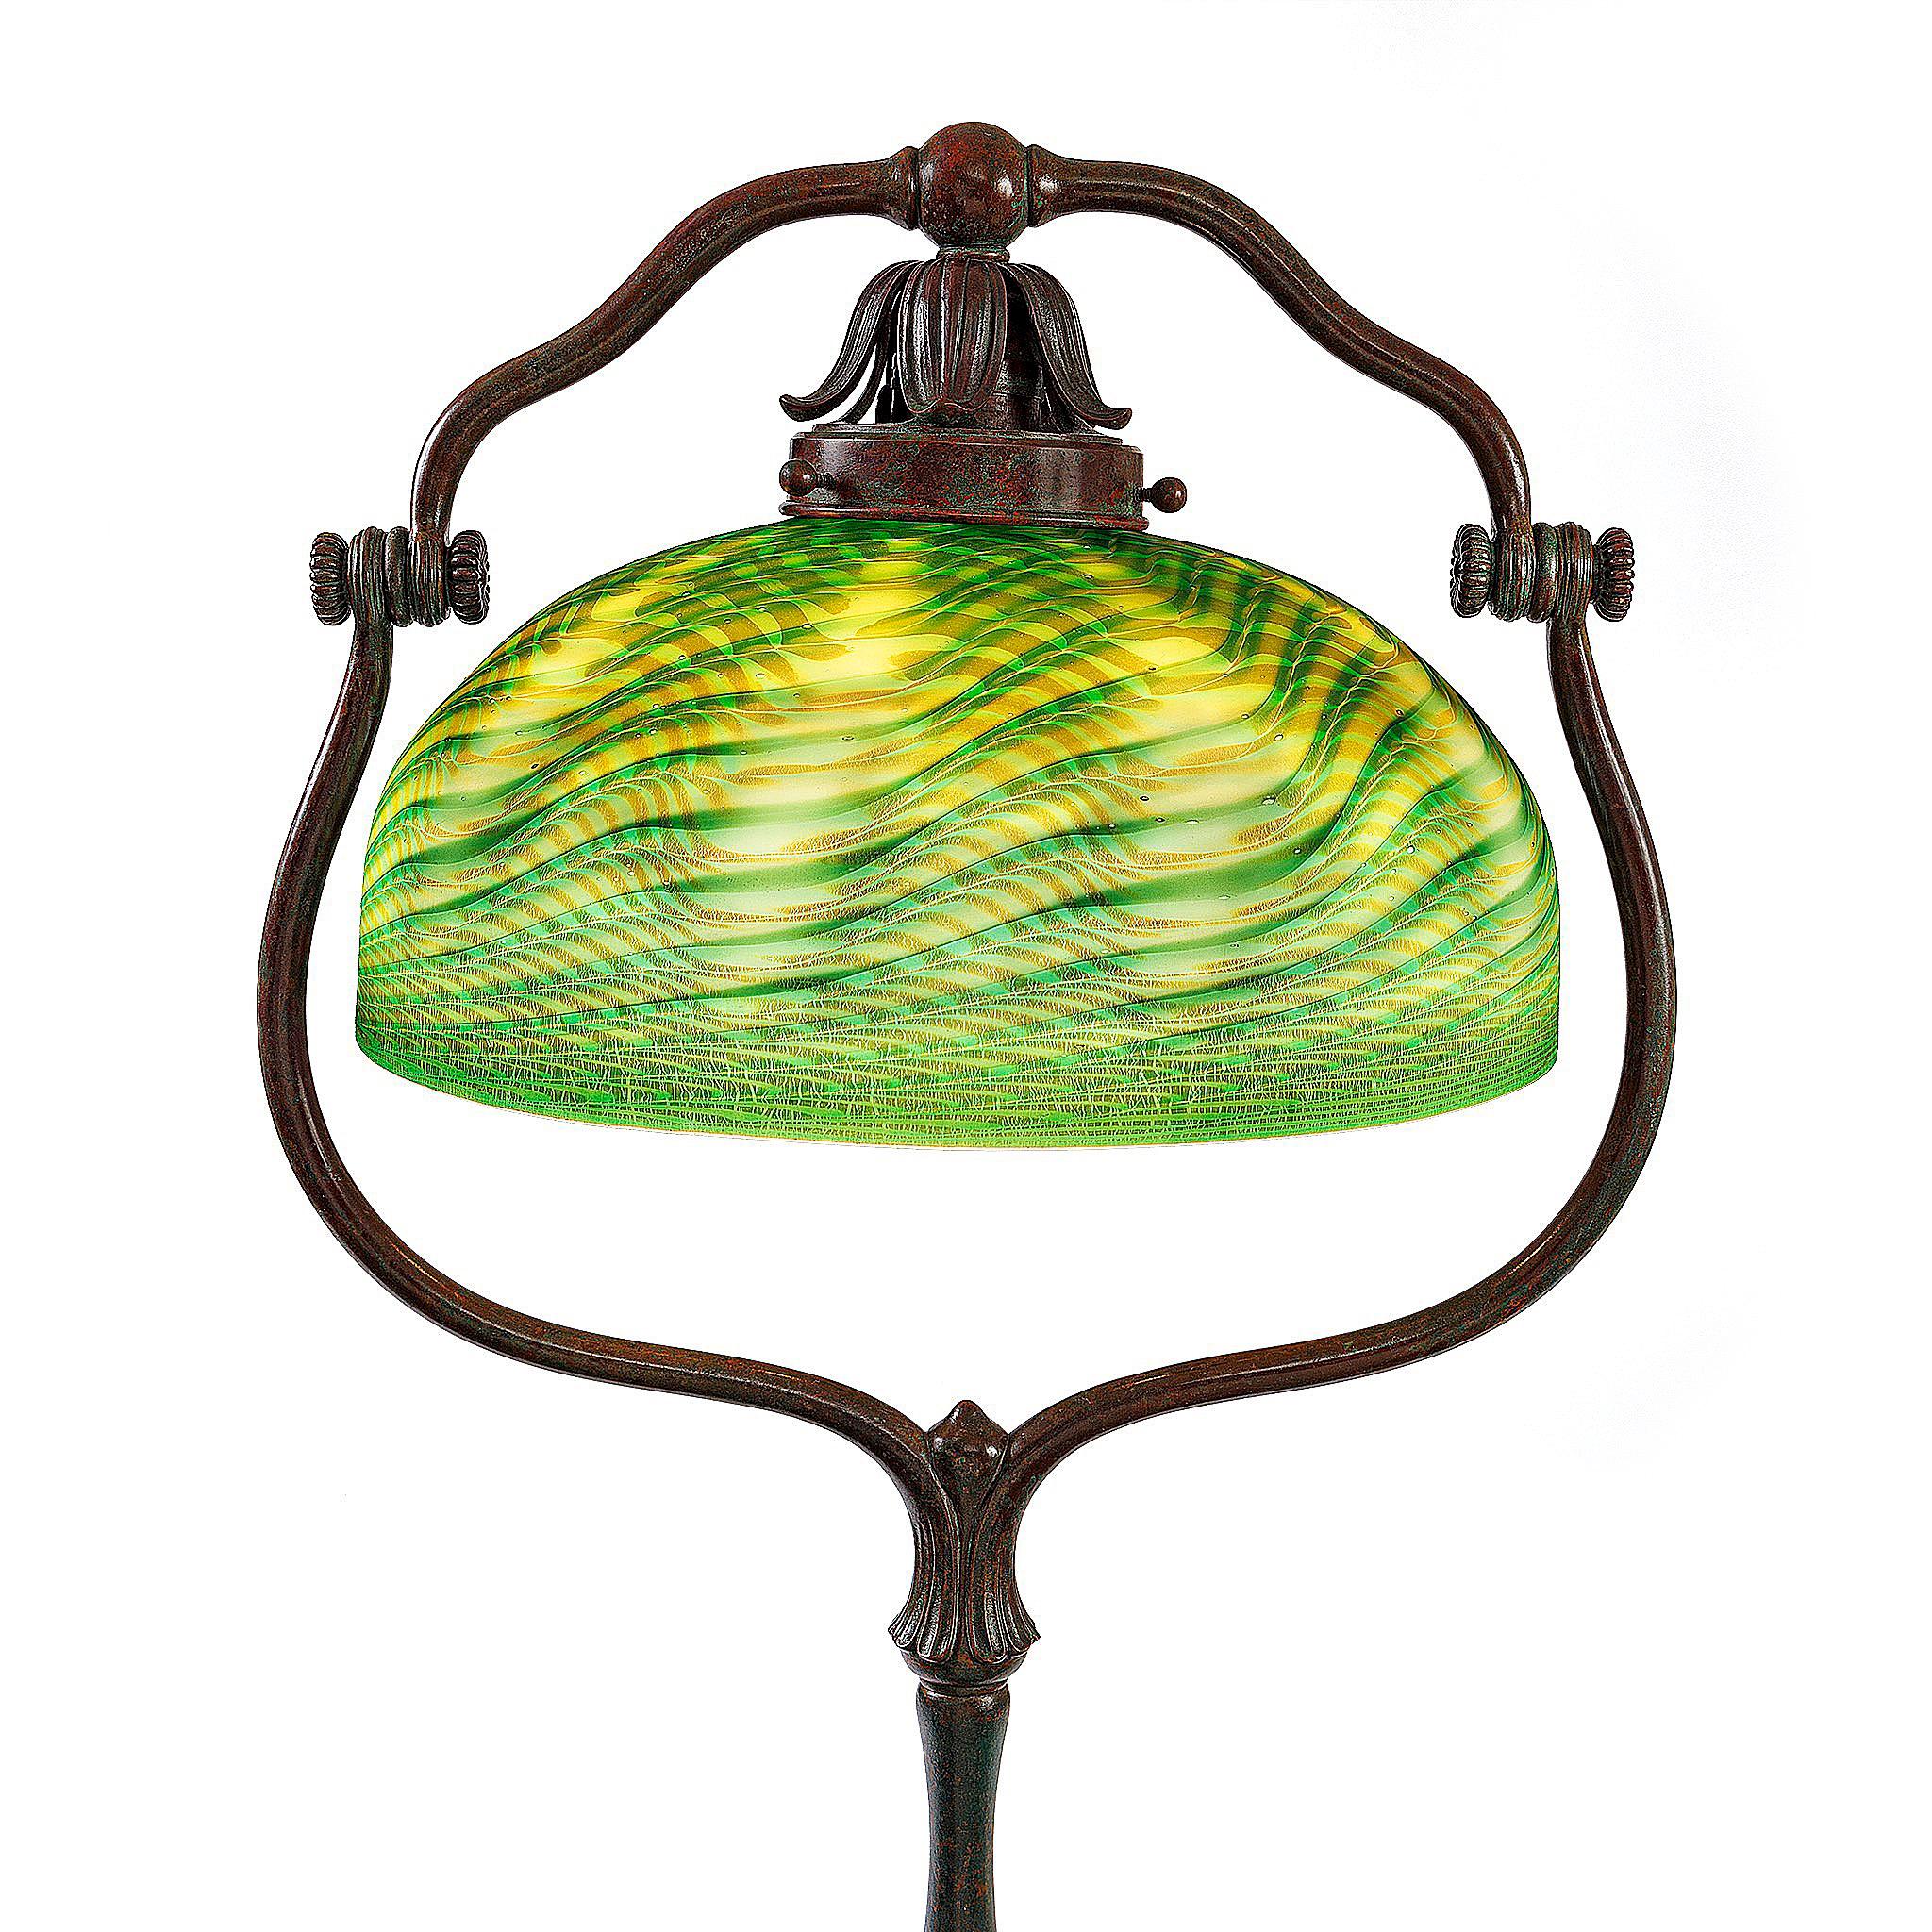 This elegant light fixture, with its famous 